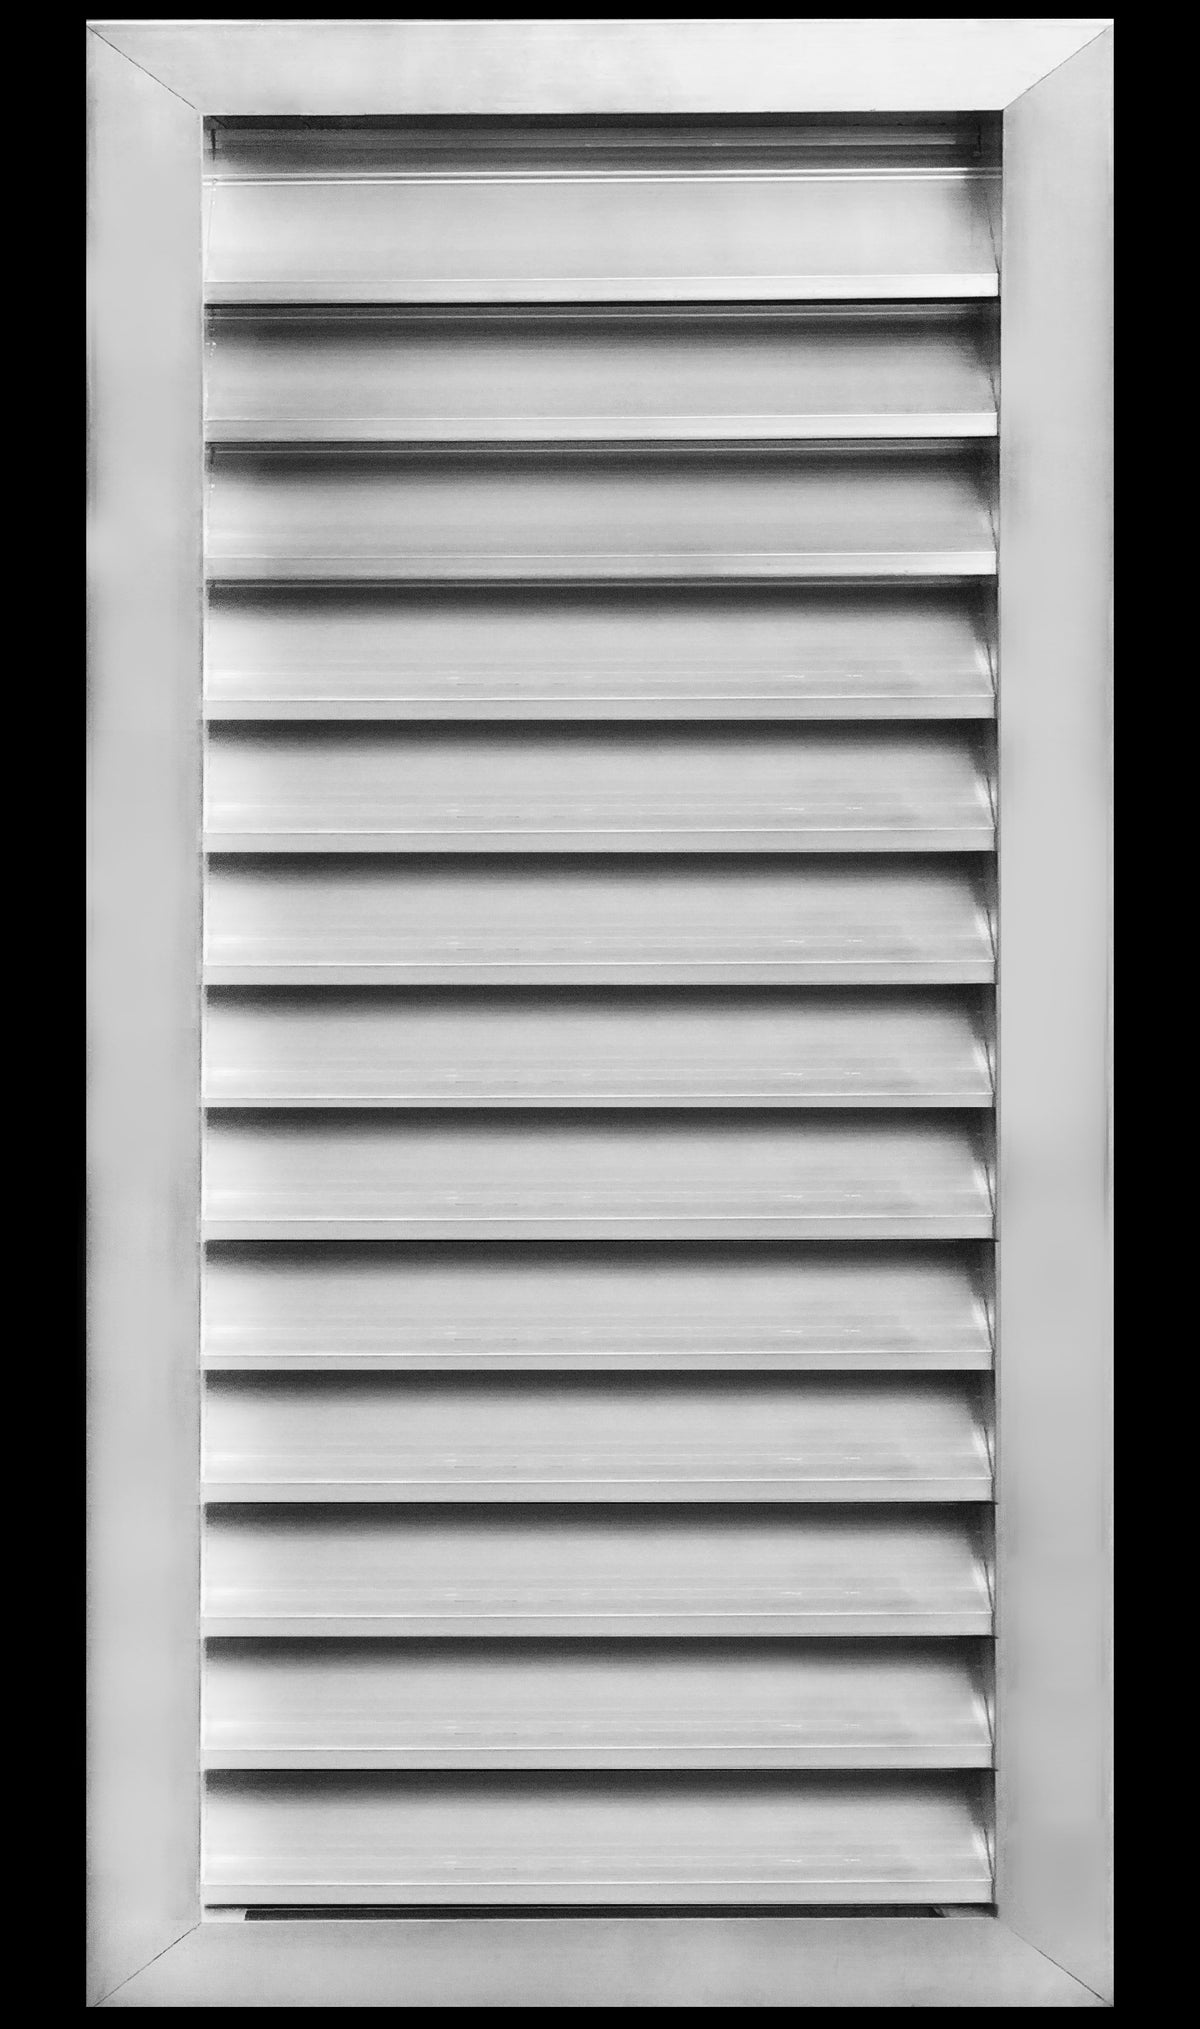 14&quot;w X 32&quot;h Aluminum Outdoor Weather Proof Louvers - Rain &amp; Waterproof Air Vent With Screen Mesh